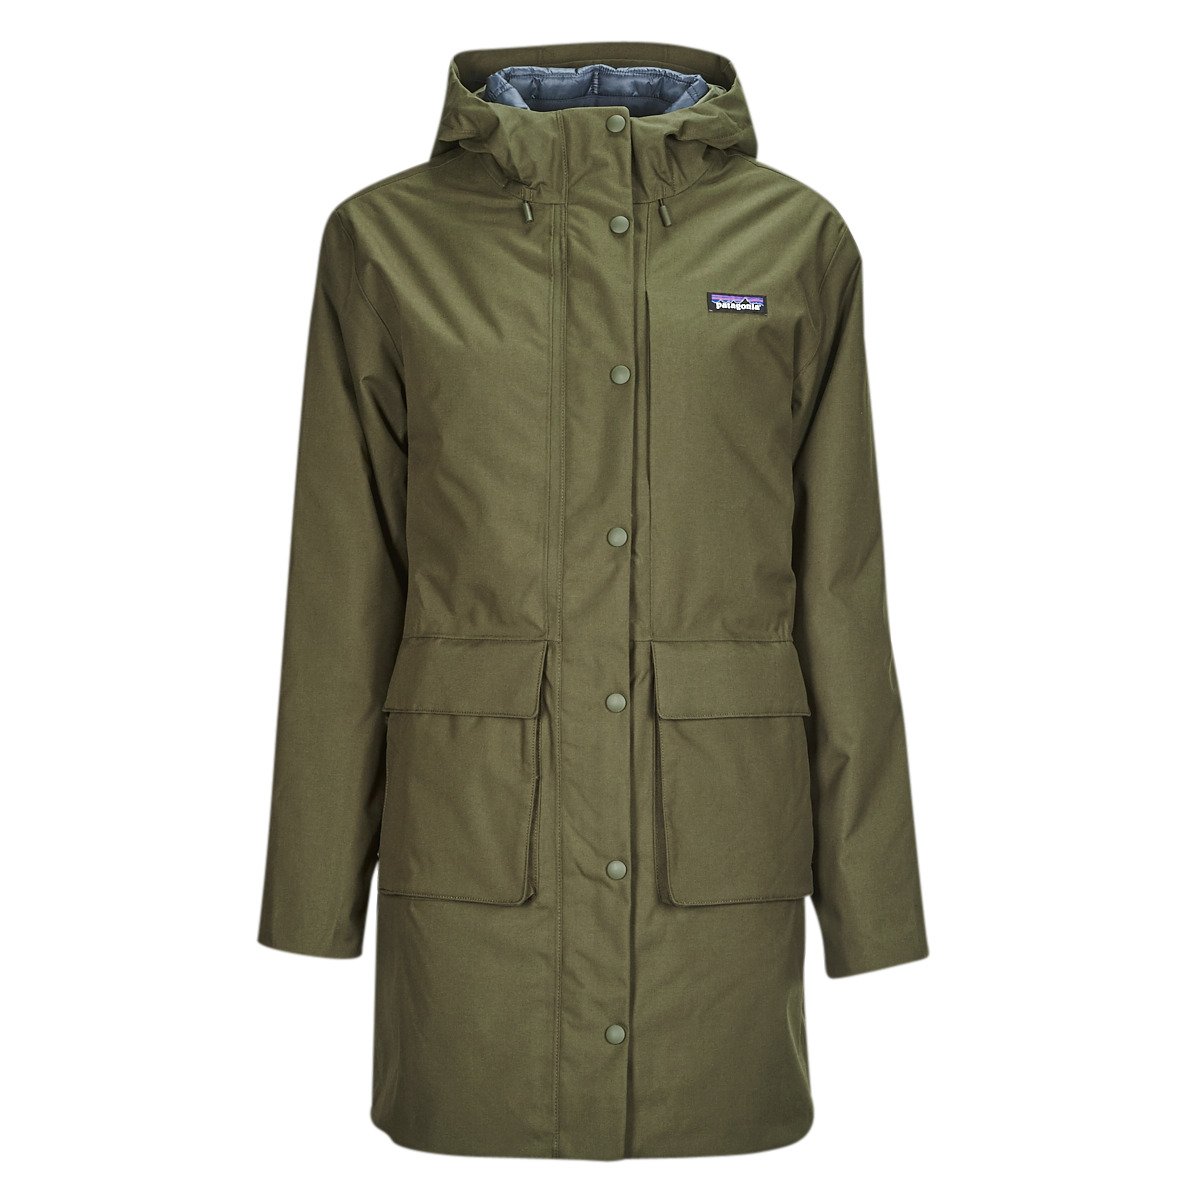 PINE BANK 3-IN-1 PARKA